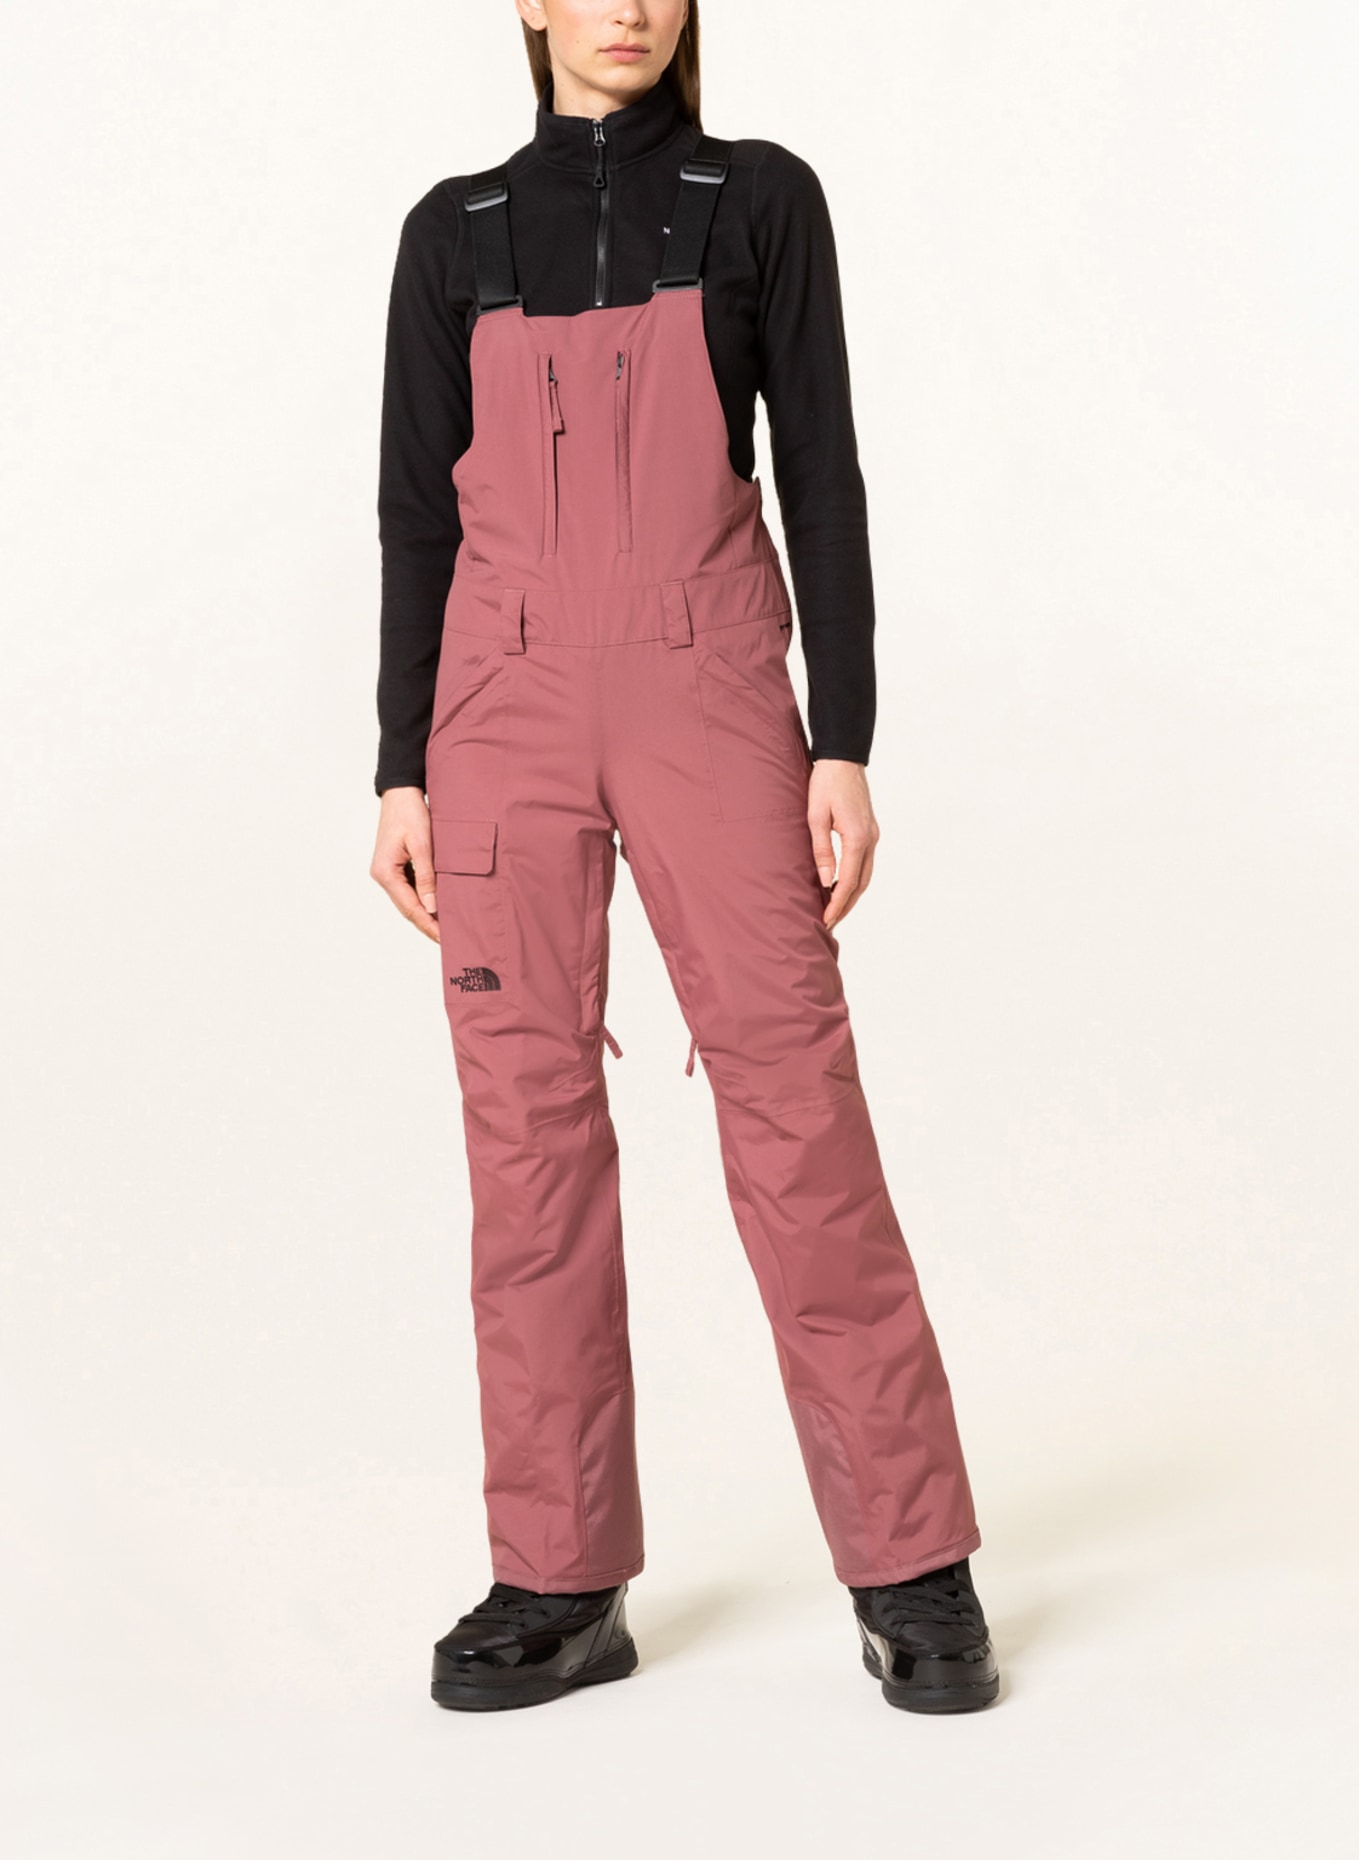 THE NORTH FACE Ski pants FREEDOM in light red